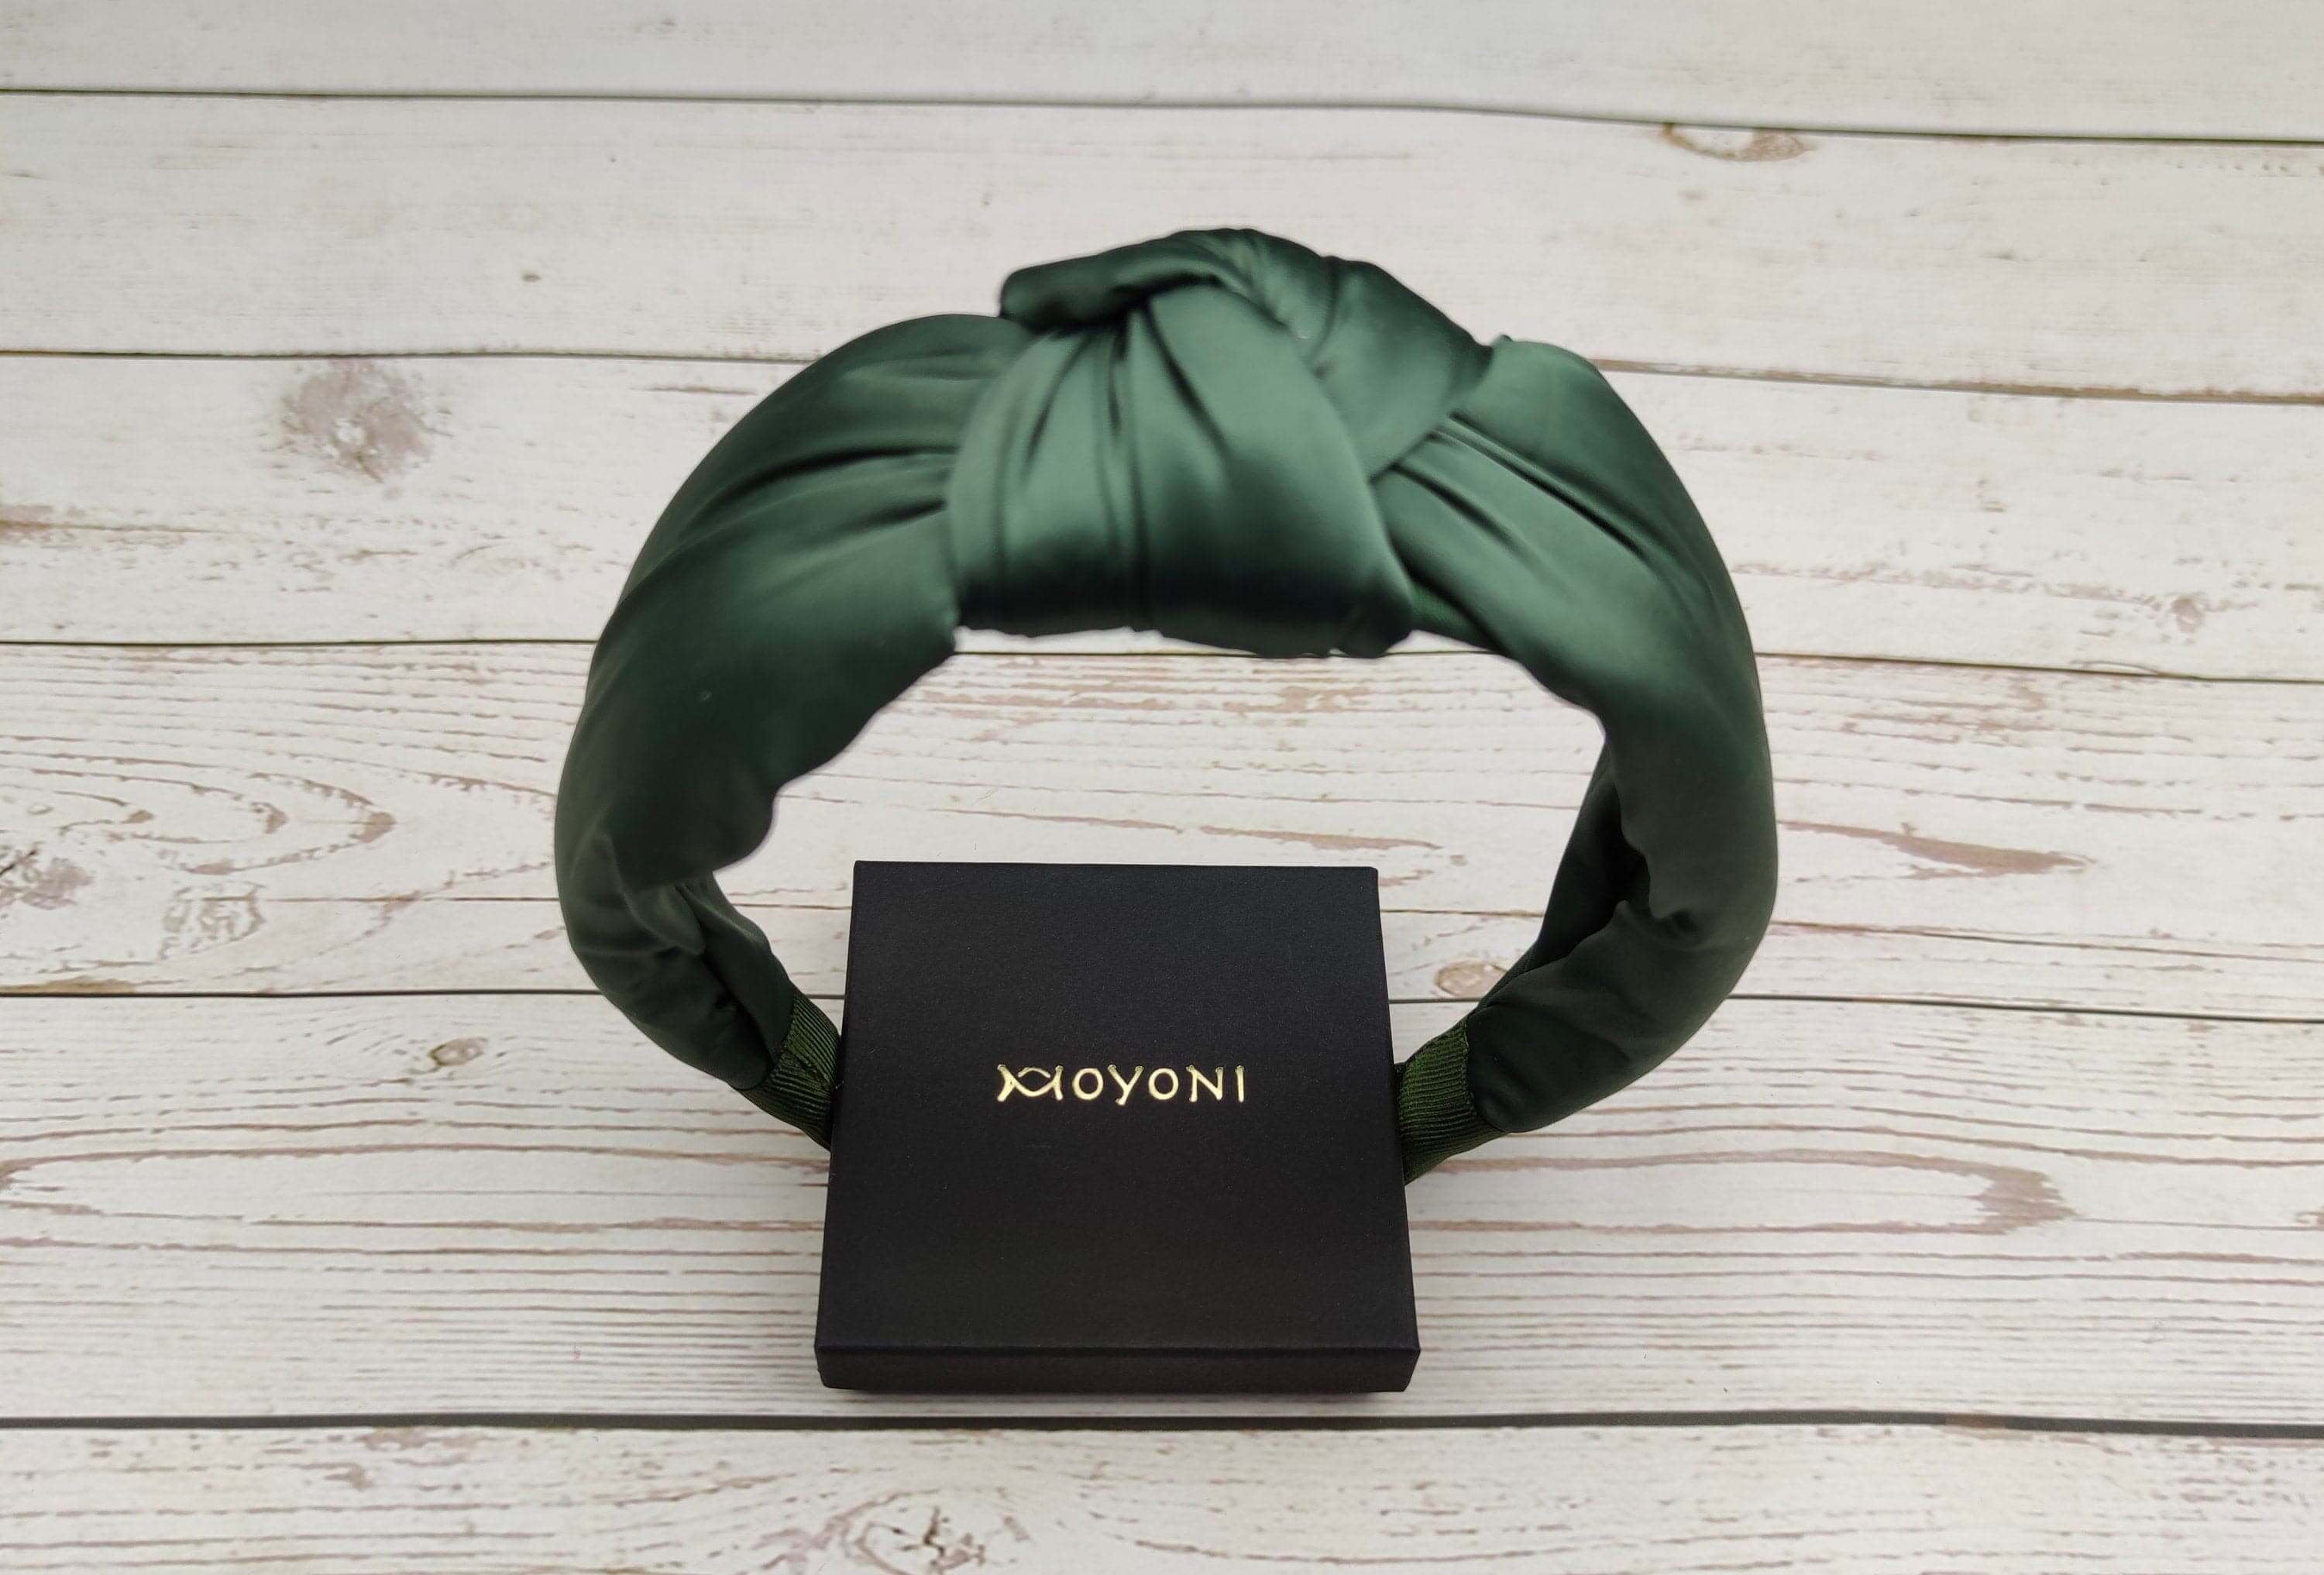 Find the best Green color padded satin headband here! This stylish headband is made of satin fabric and features a twisted design, making it extra comfortable to wear.